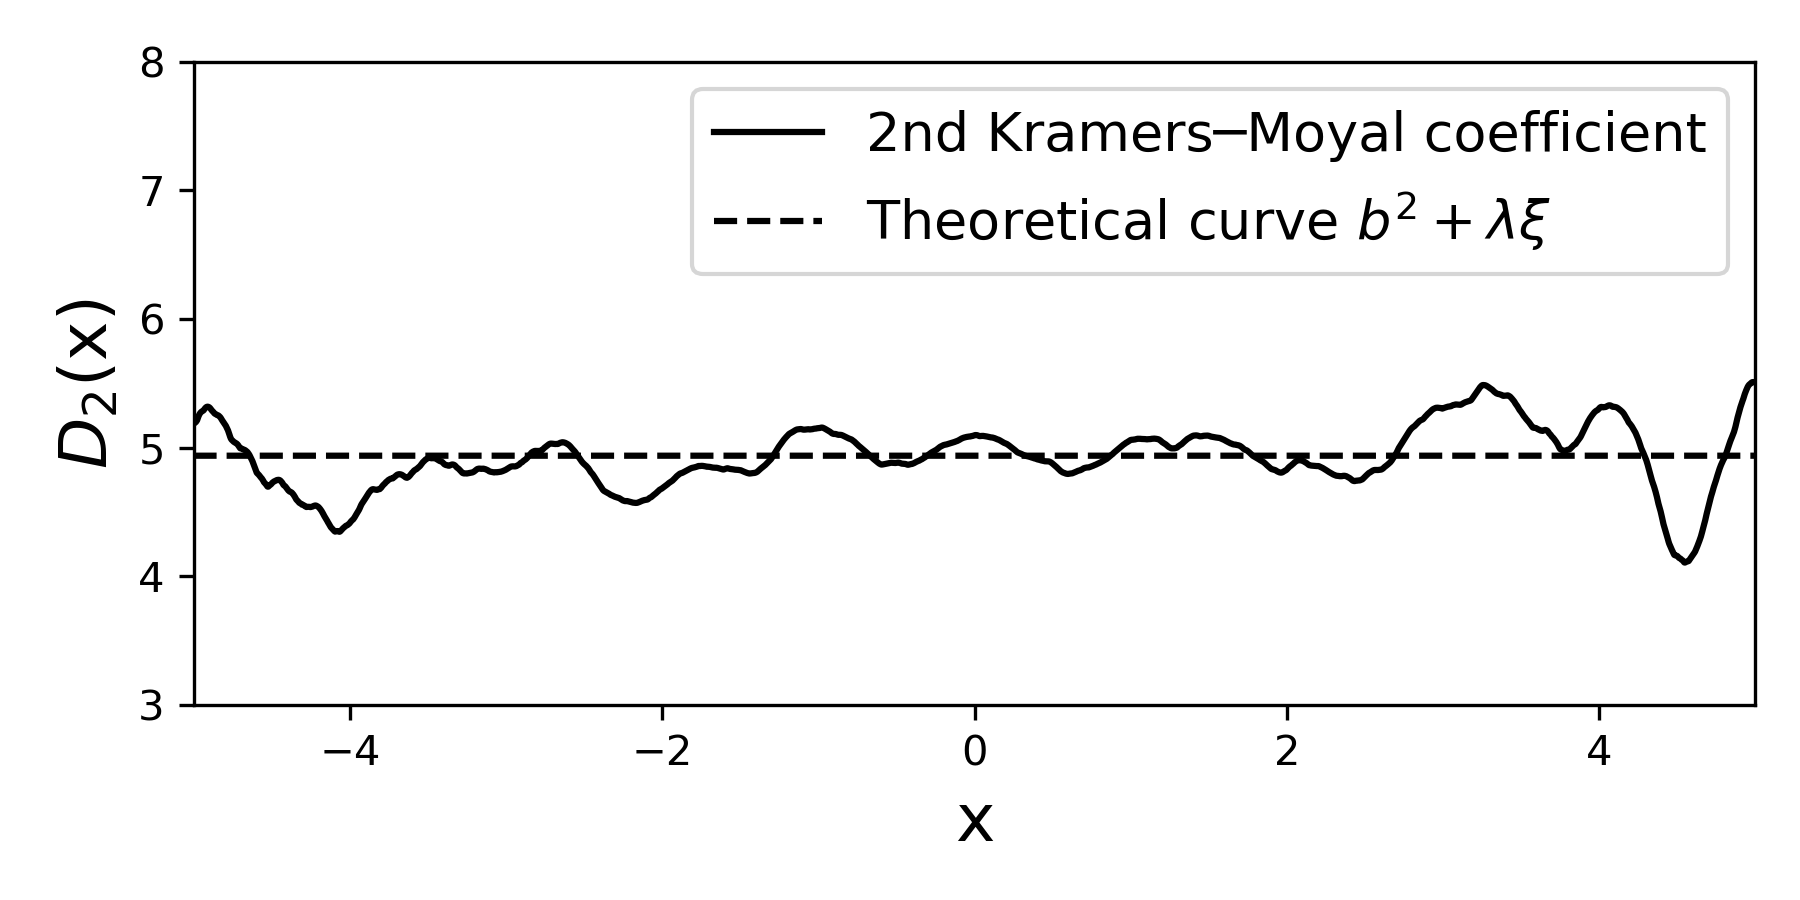 The 2nd Kramers---Moyal coefficient